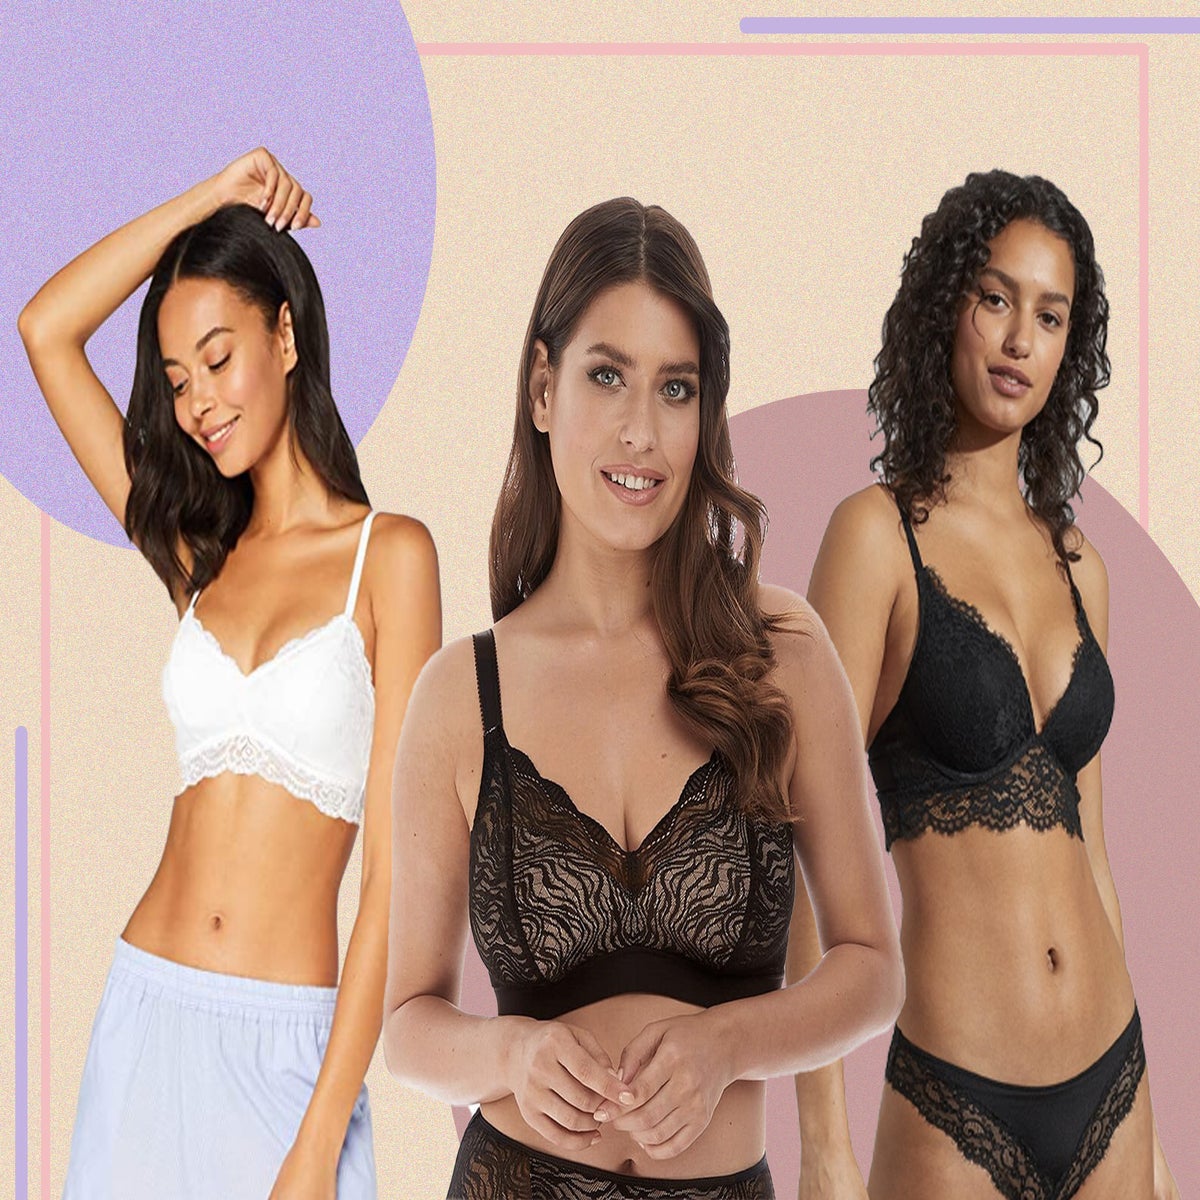 Best bralettes for all shapes: Longline, lace, plunge and sheer